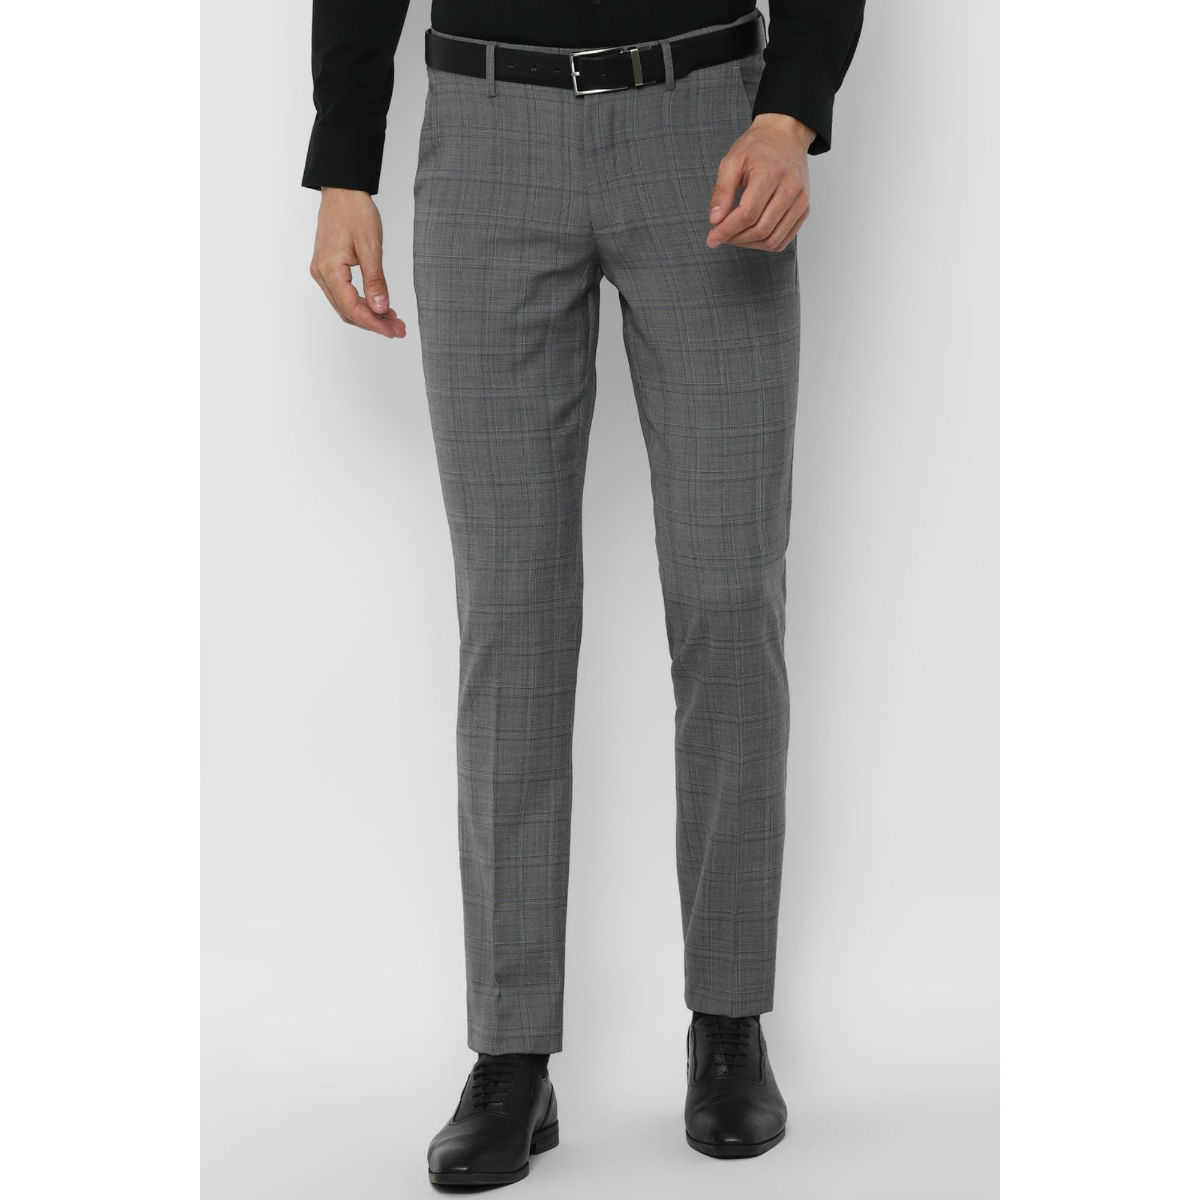 Buy Louis Philippe Men Navy Blue Checked Slim Fit Formal Trousers - Trousers  for Men 20443518 | Myntra